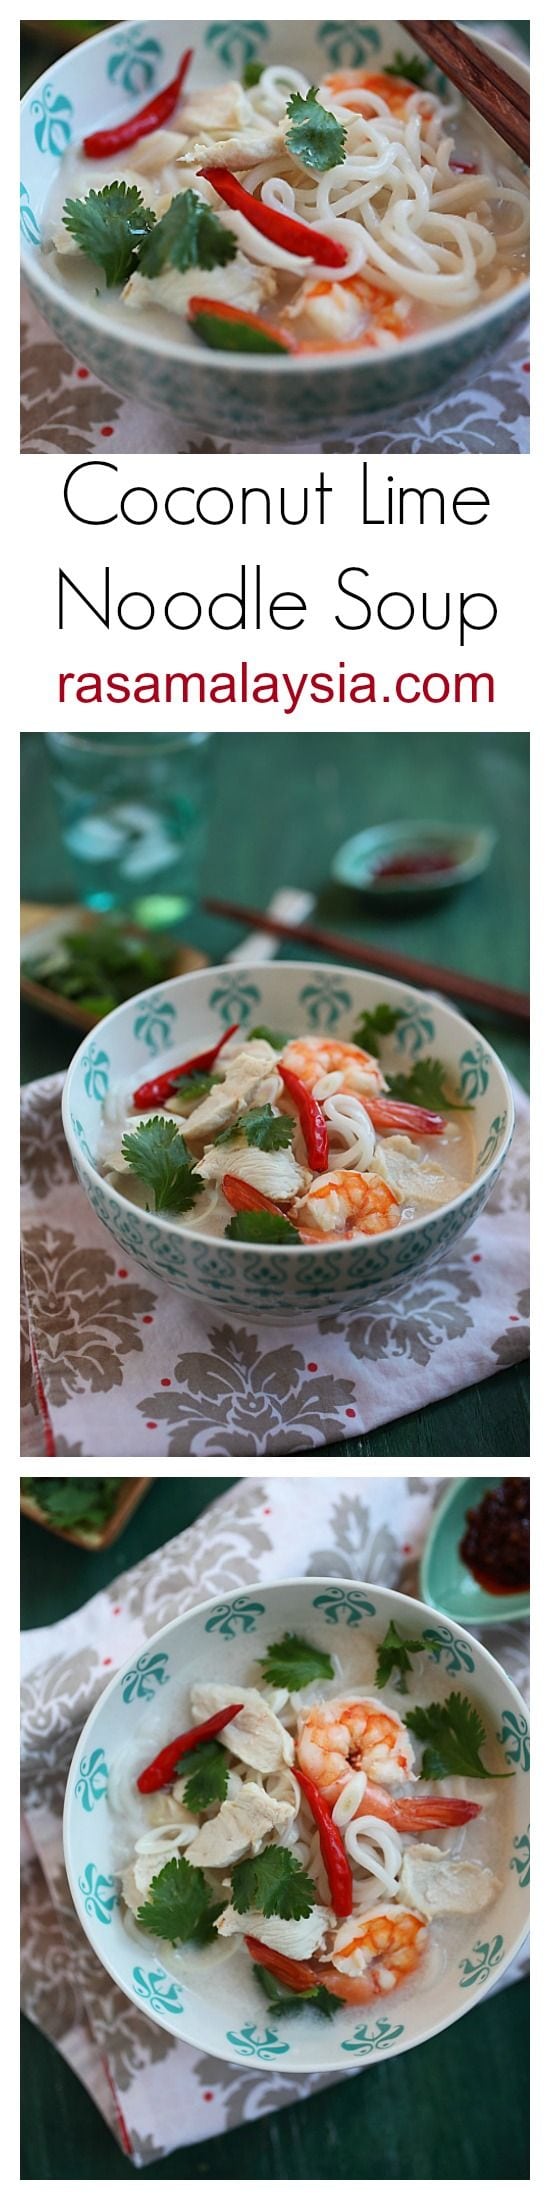 Coconut Lime Chicken Noodle Soup Recipe – So yummy and refreshing you would want more than one bowls | rasamalaysia.com